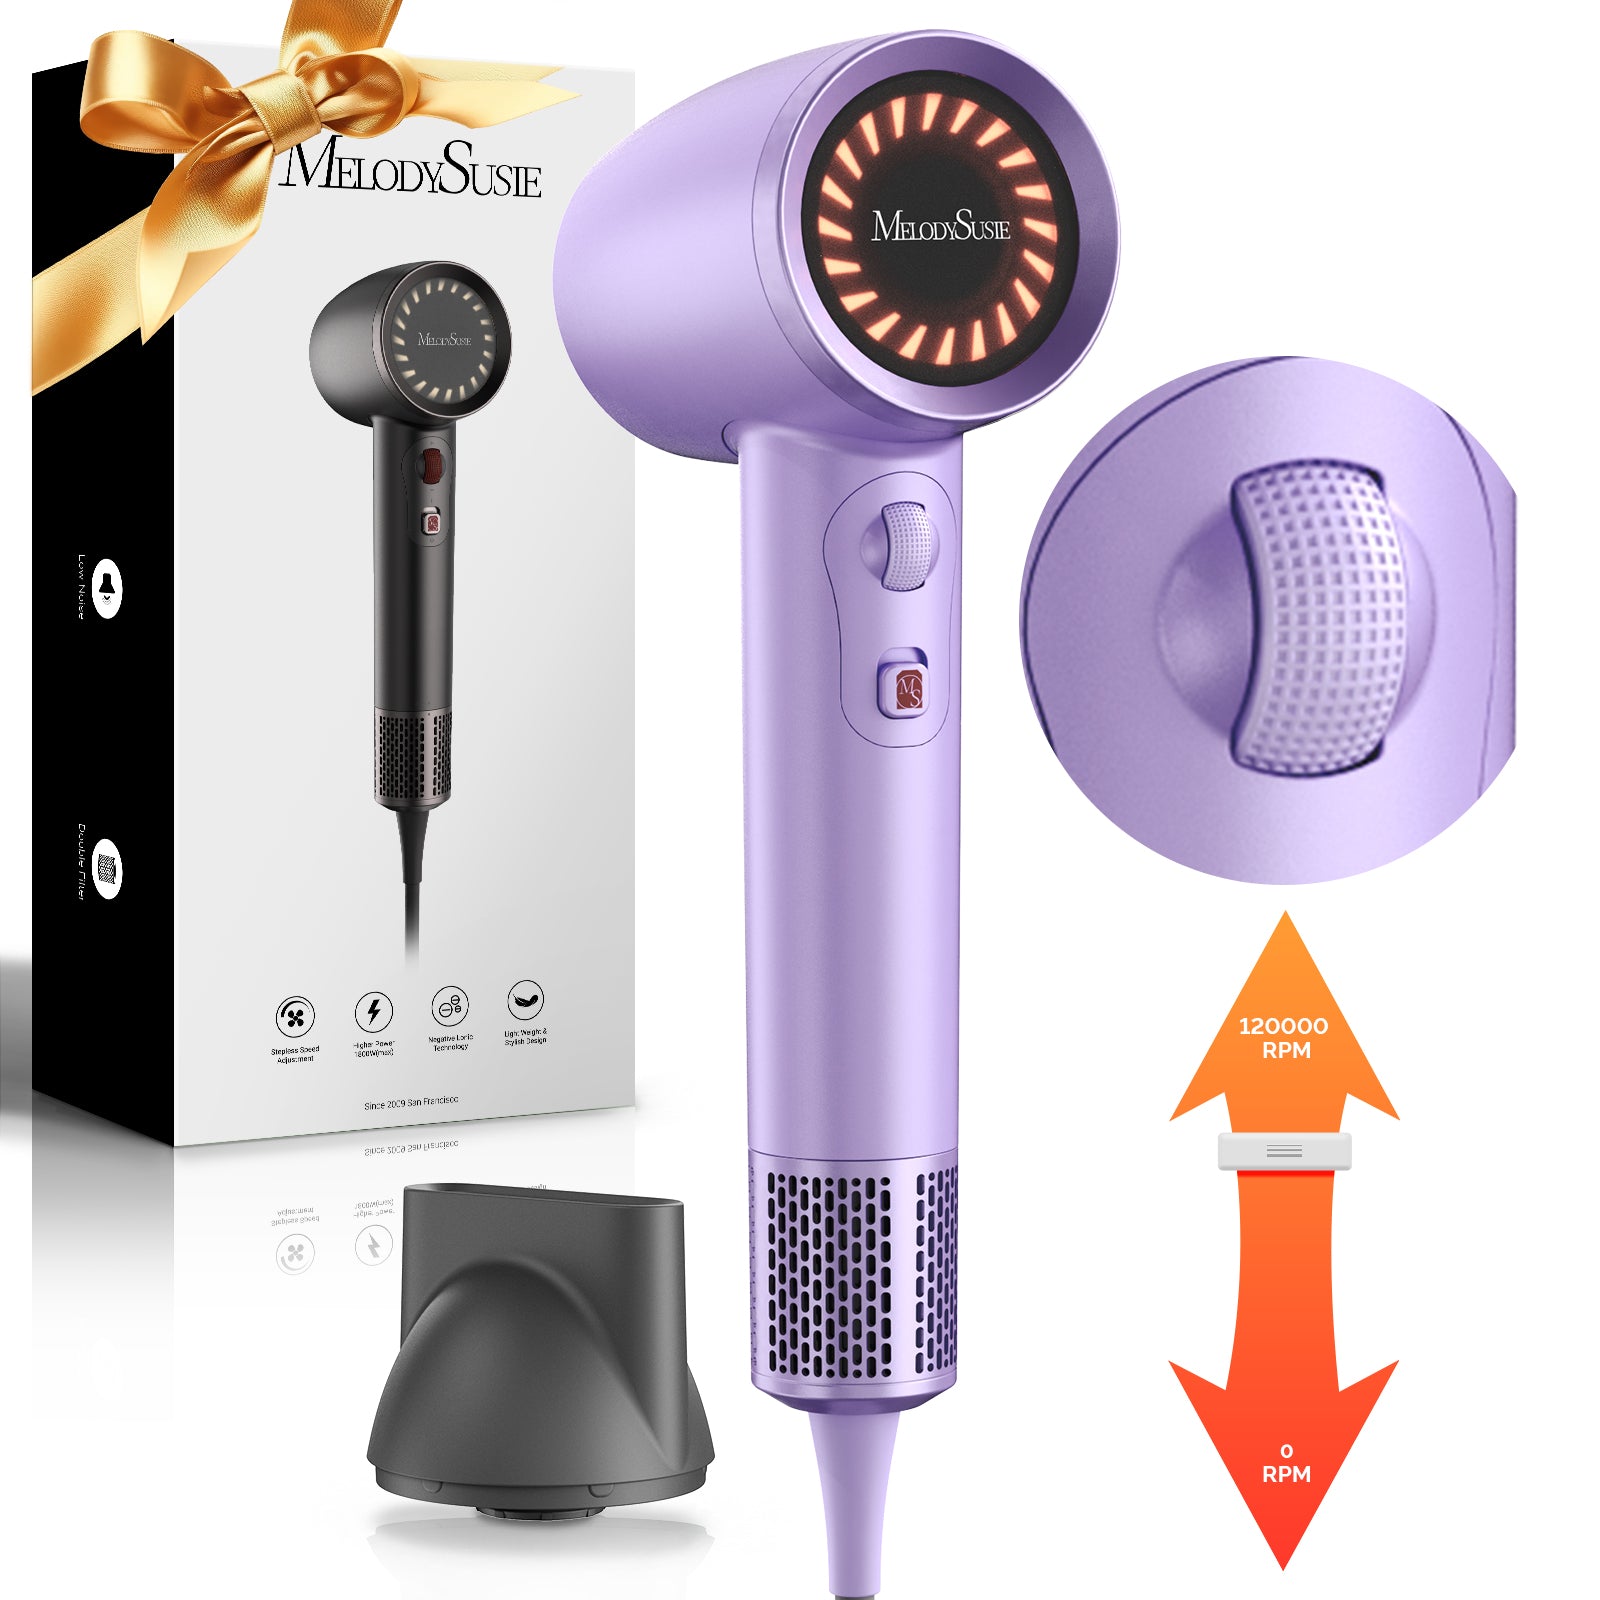 Professional Portable Ionic Hair Dryer 120,000 RPM - Purple (US ONLY)